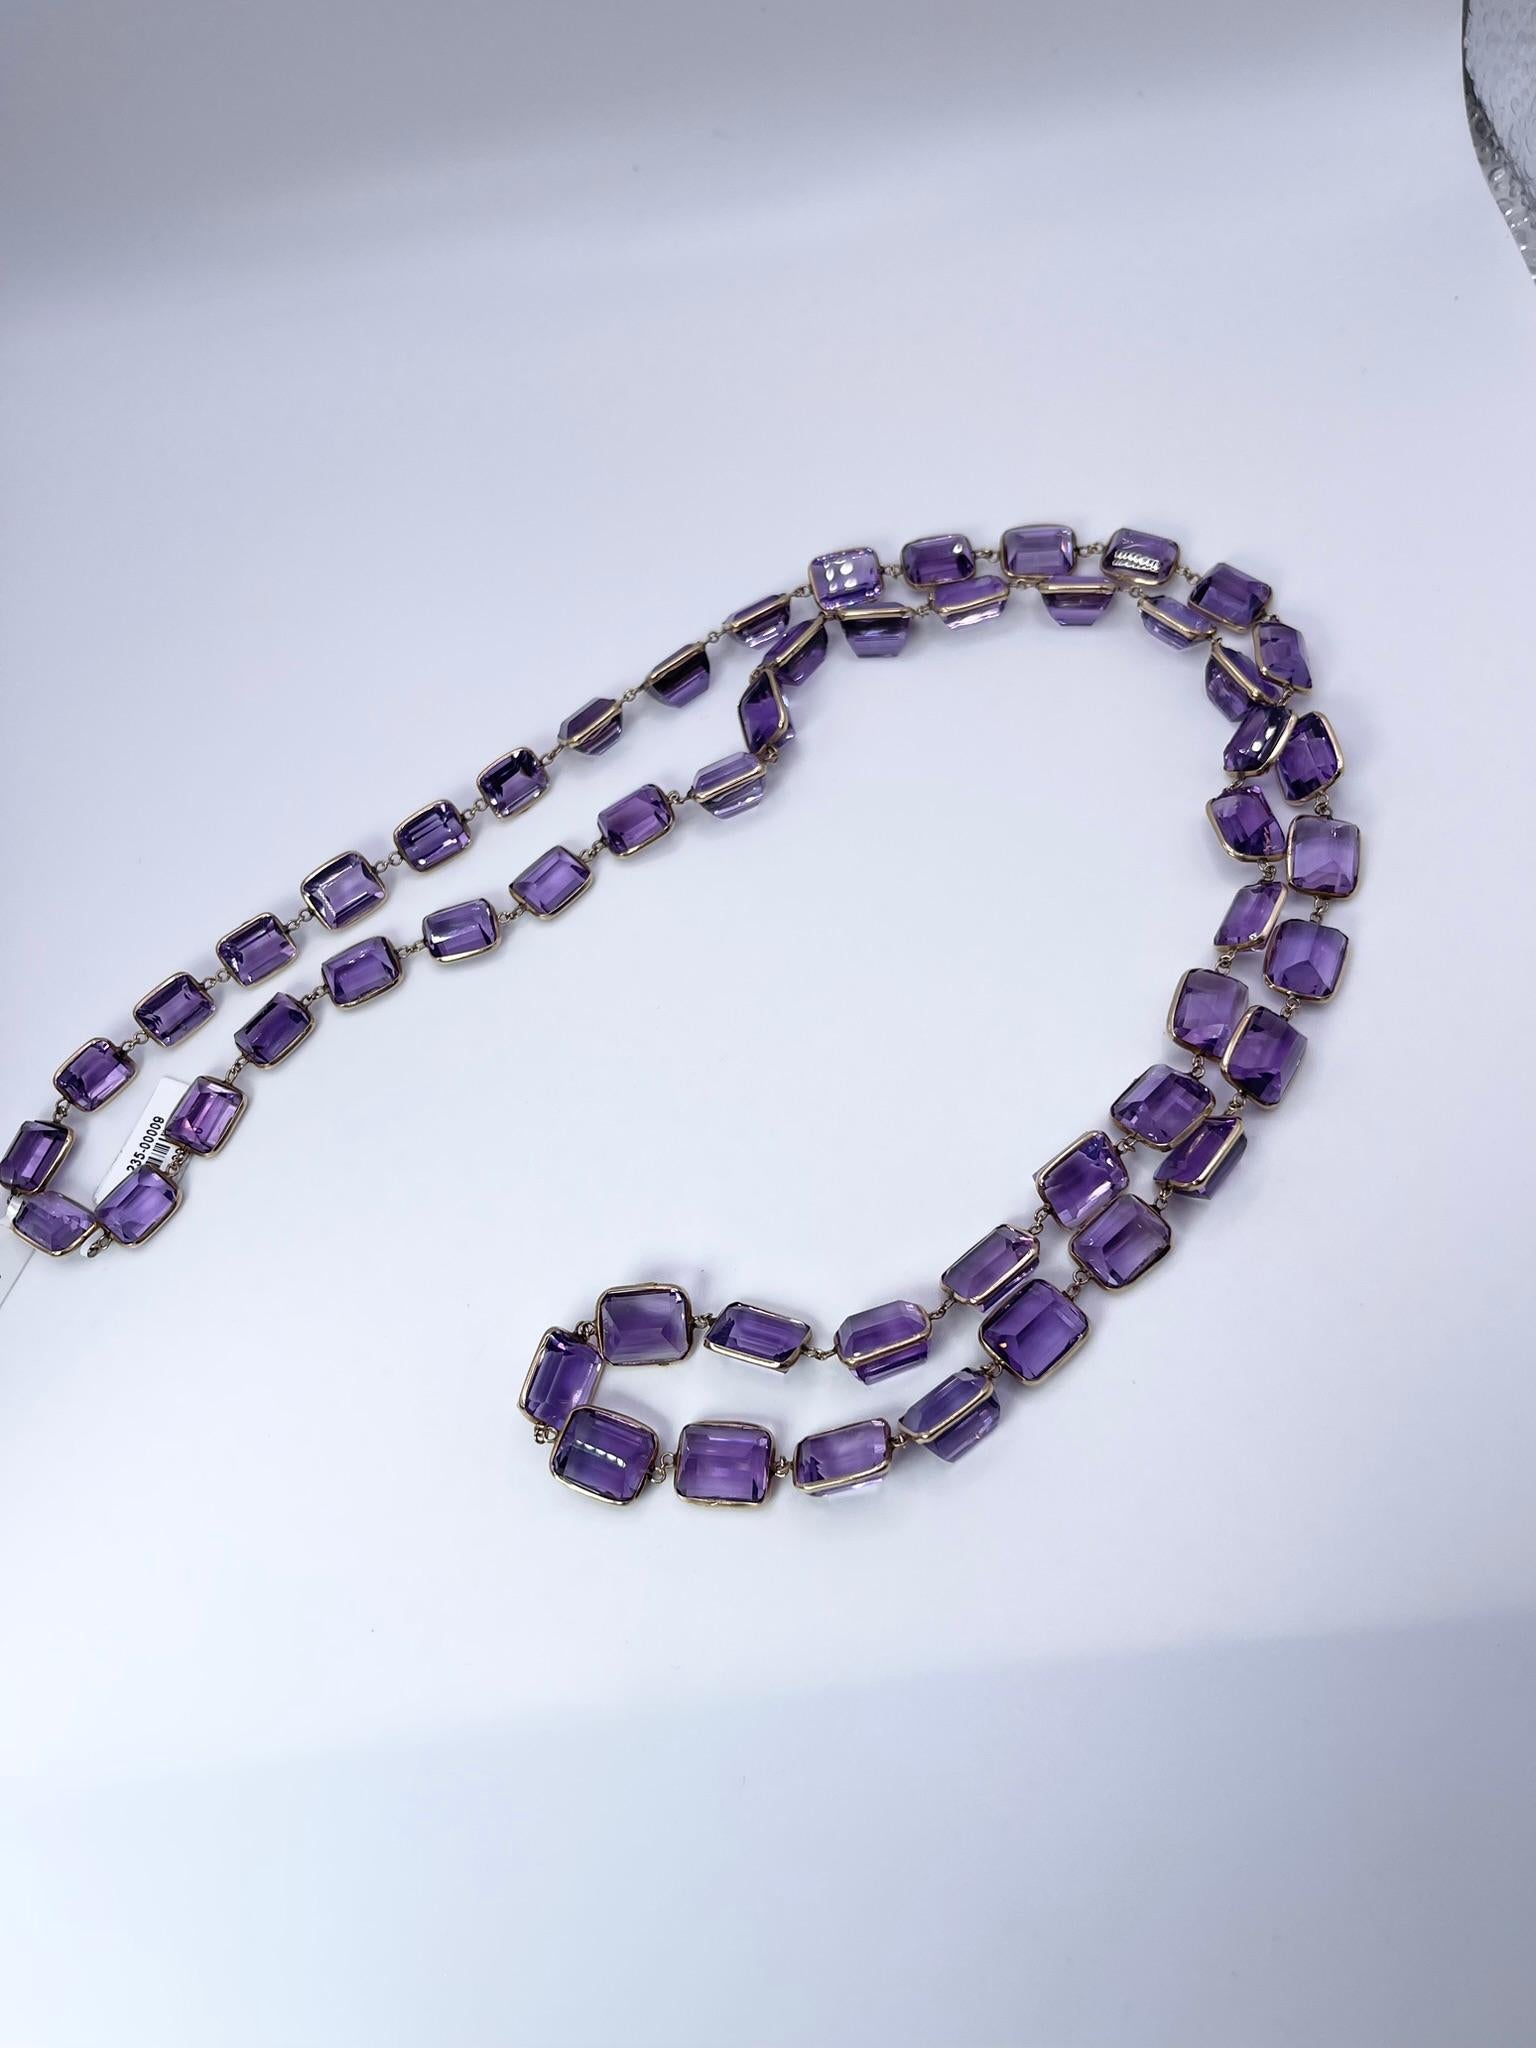 Amethyst Necklace Long Natural Amethyst Yard Necklace Link Necklace 300 Carats  In New Condition For Sale In Jupiter, FL